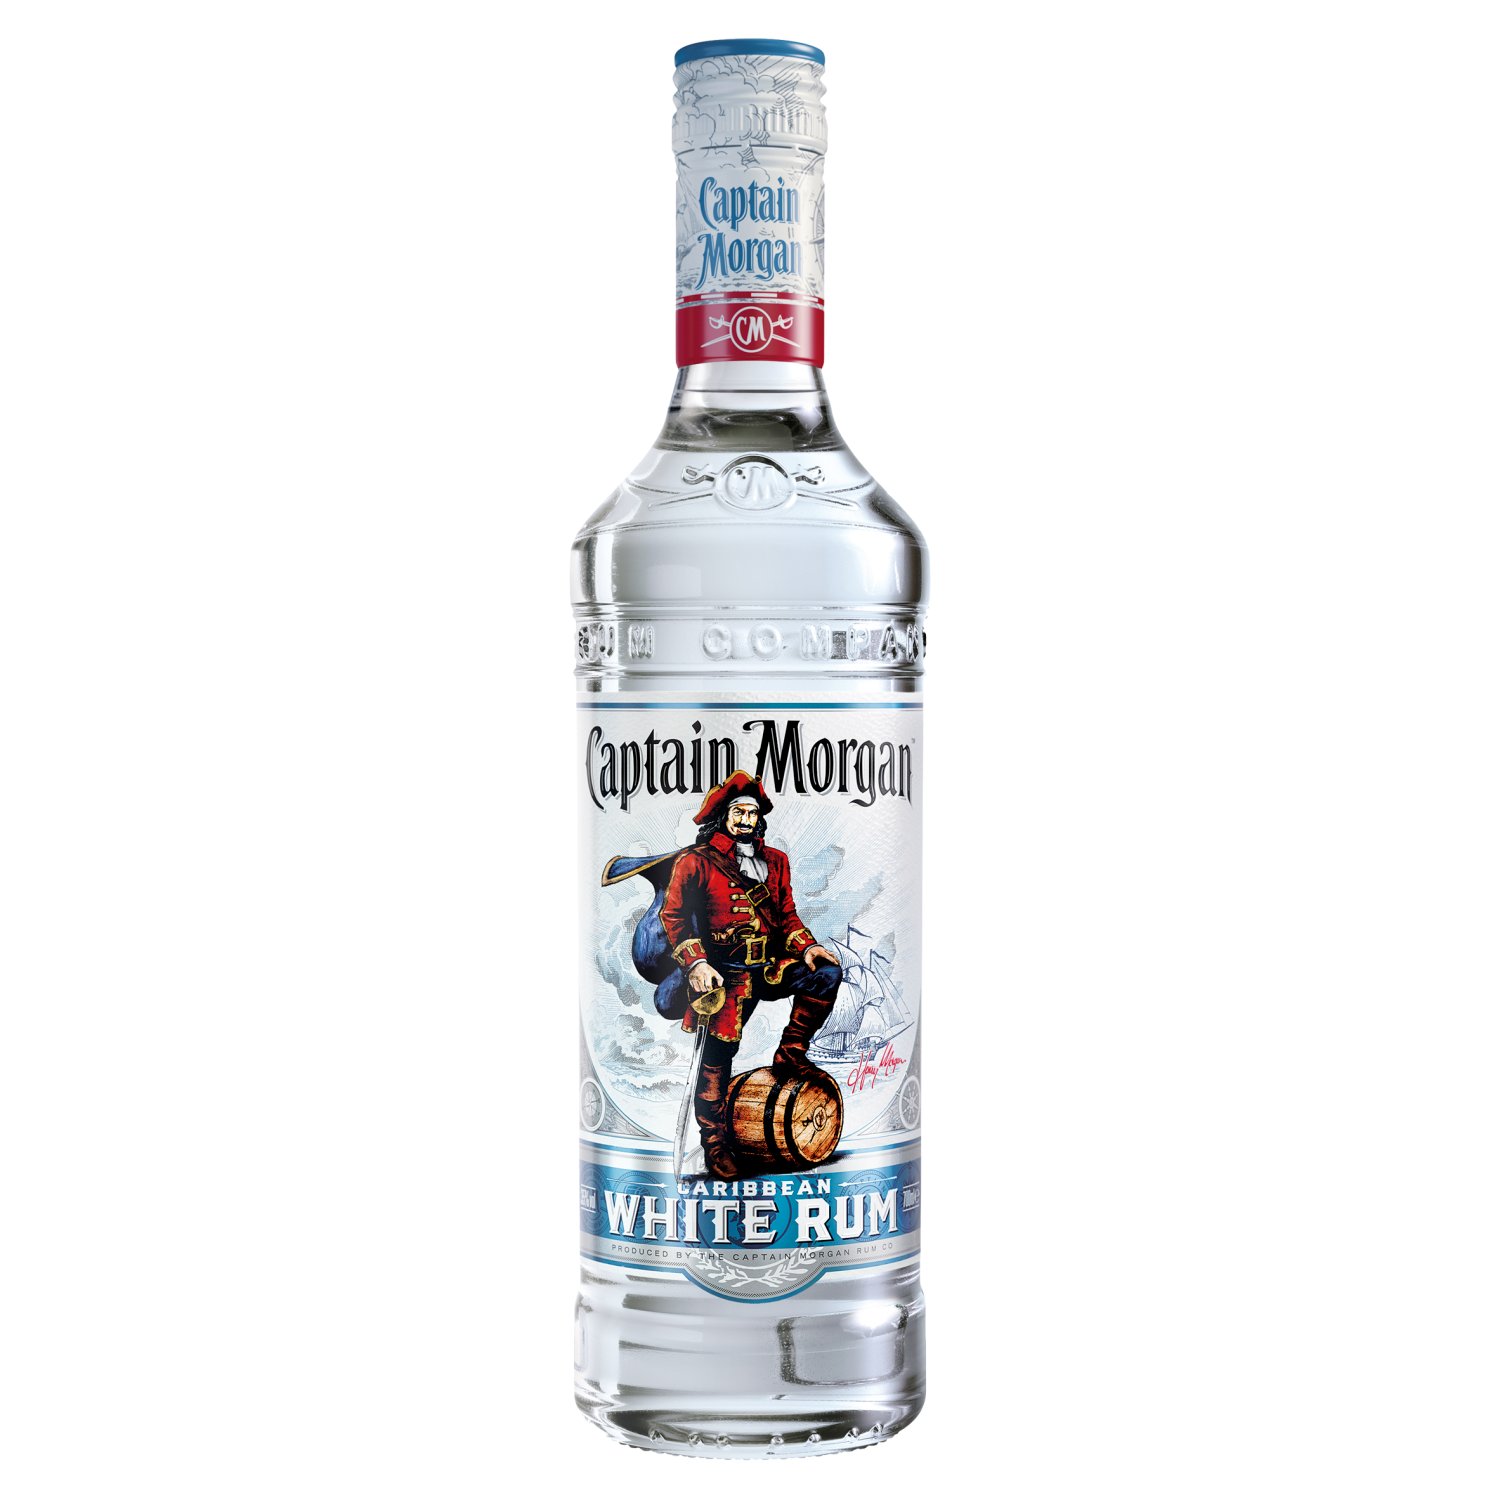 Our Captain Morgan White Rum. It takes serious crafting to make a white rum this delicious. Distilled to make our white rum so smooth, so delicious, so subtly sweet, it’ll make your mouth water just reading about it. See what we mean?